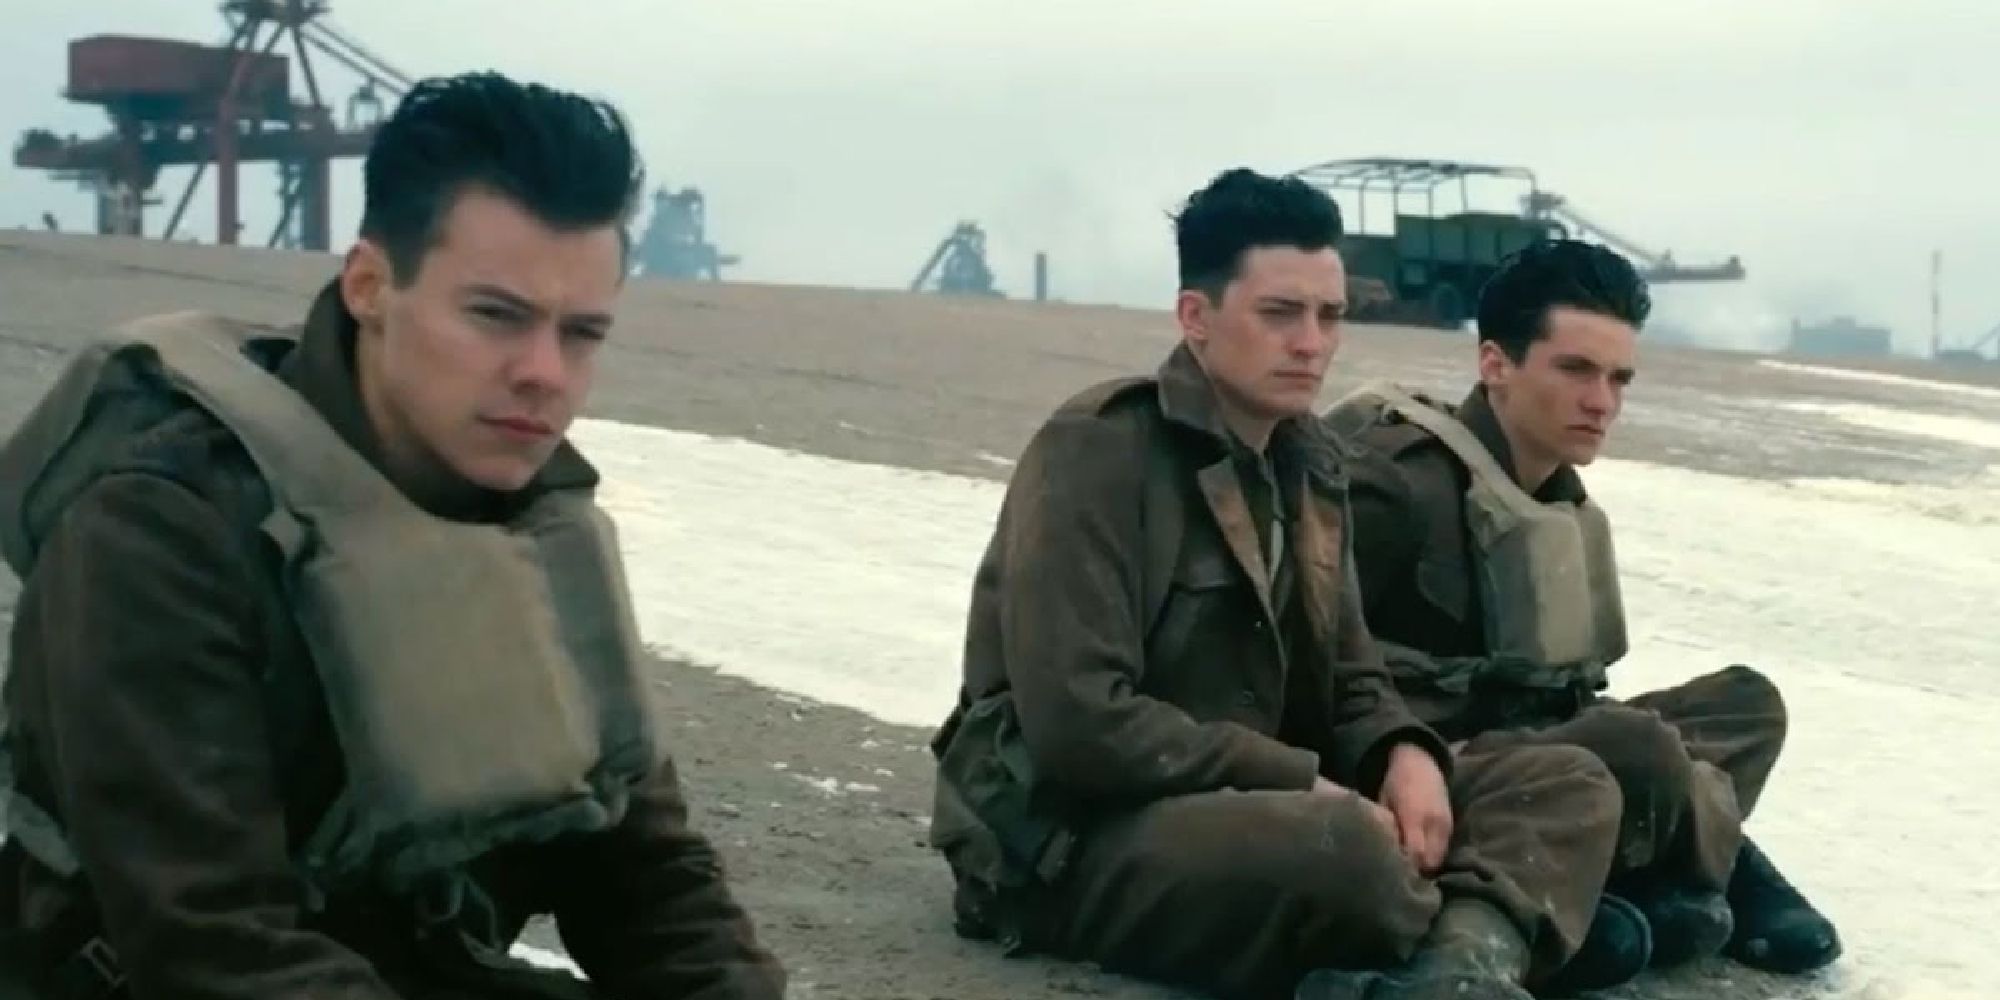 Harry Styles sitting on a beach in Dunkirk